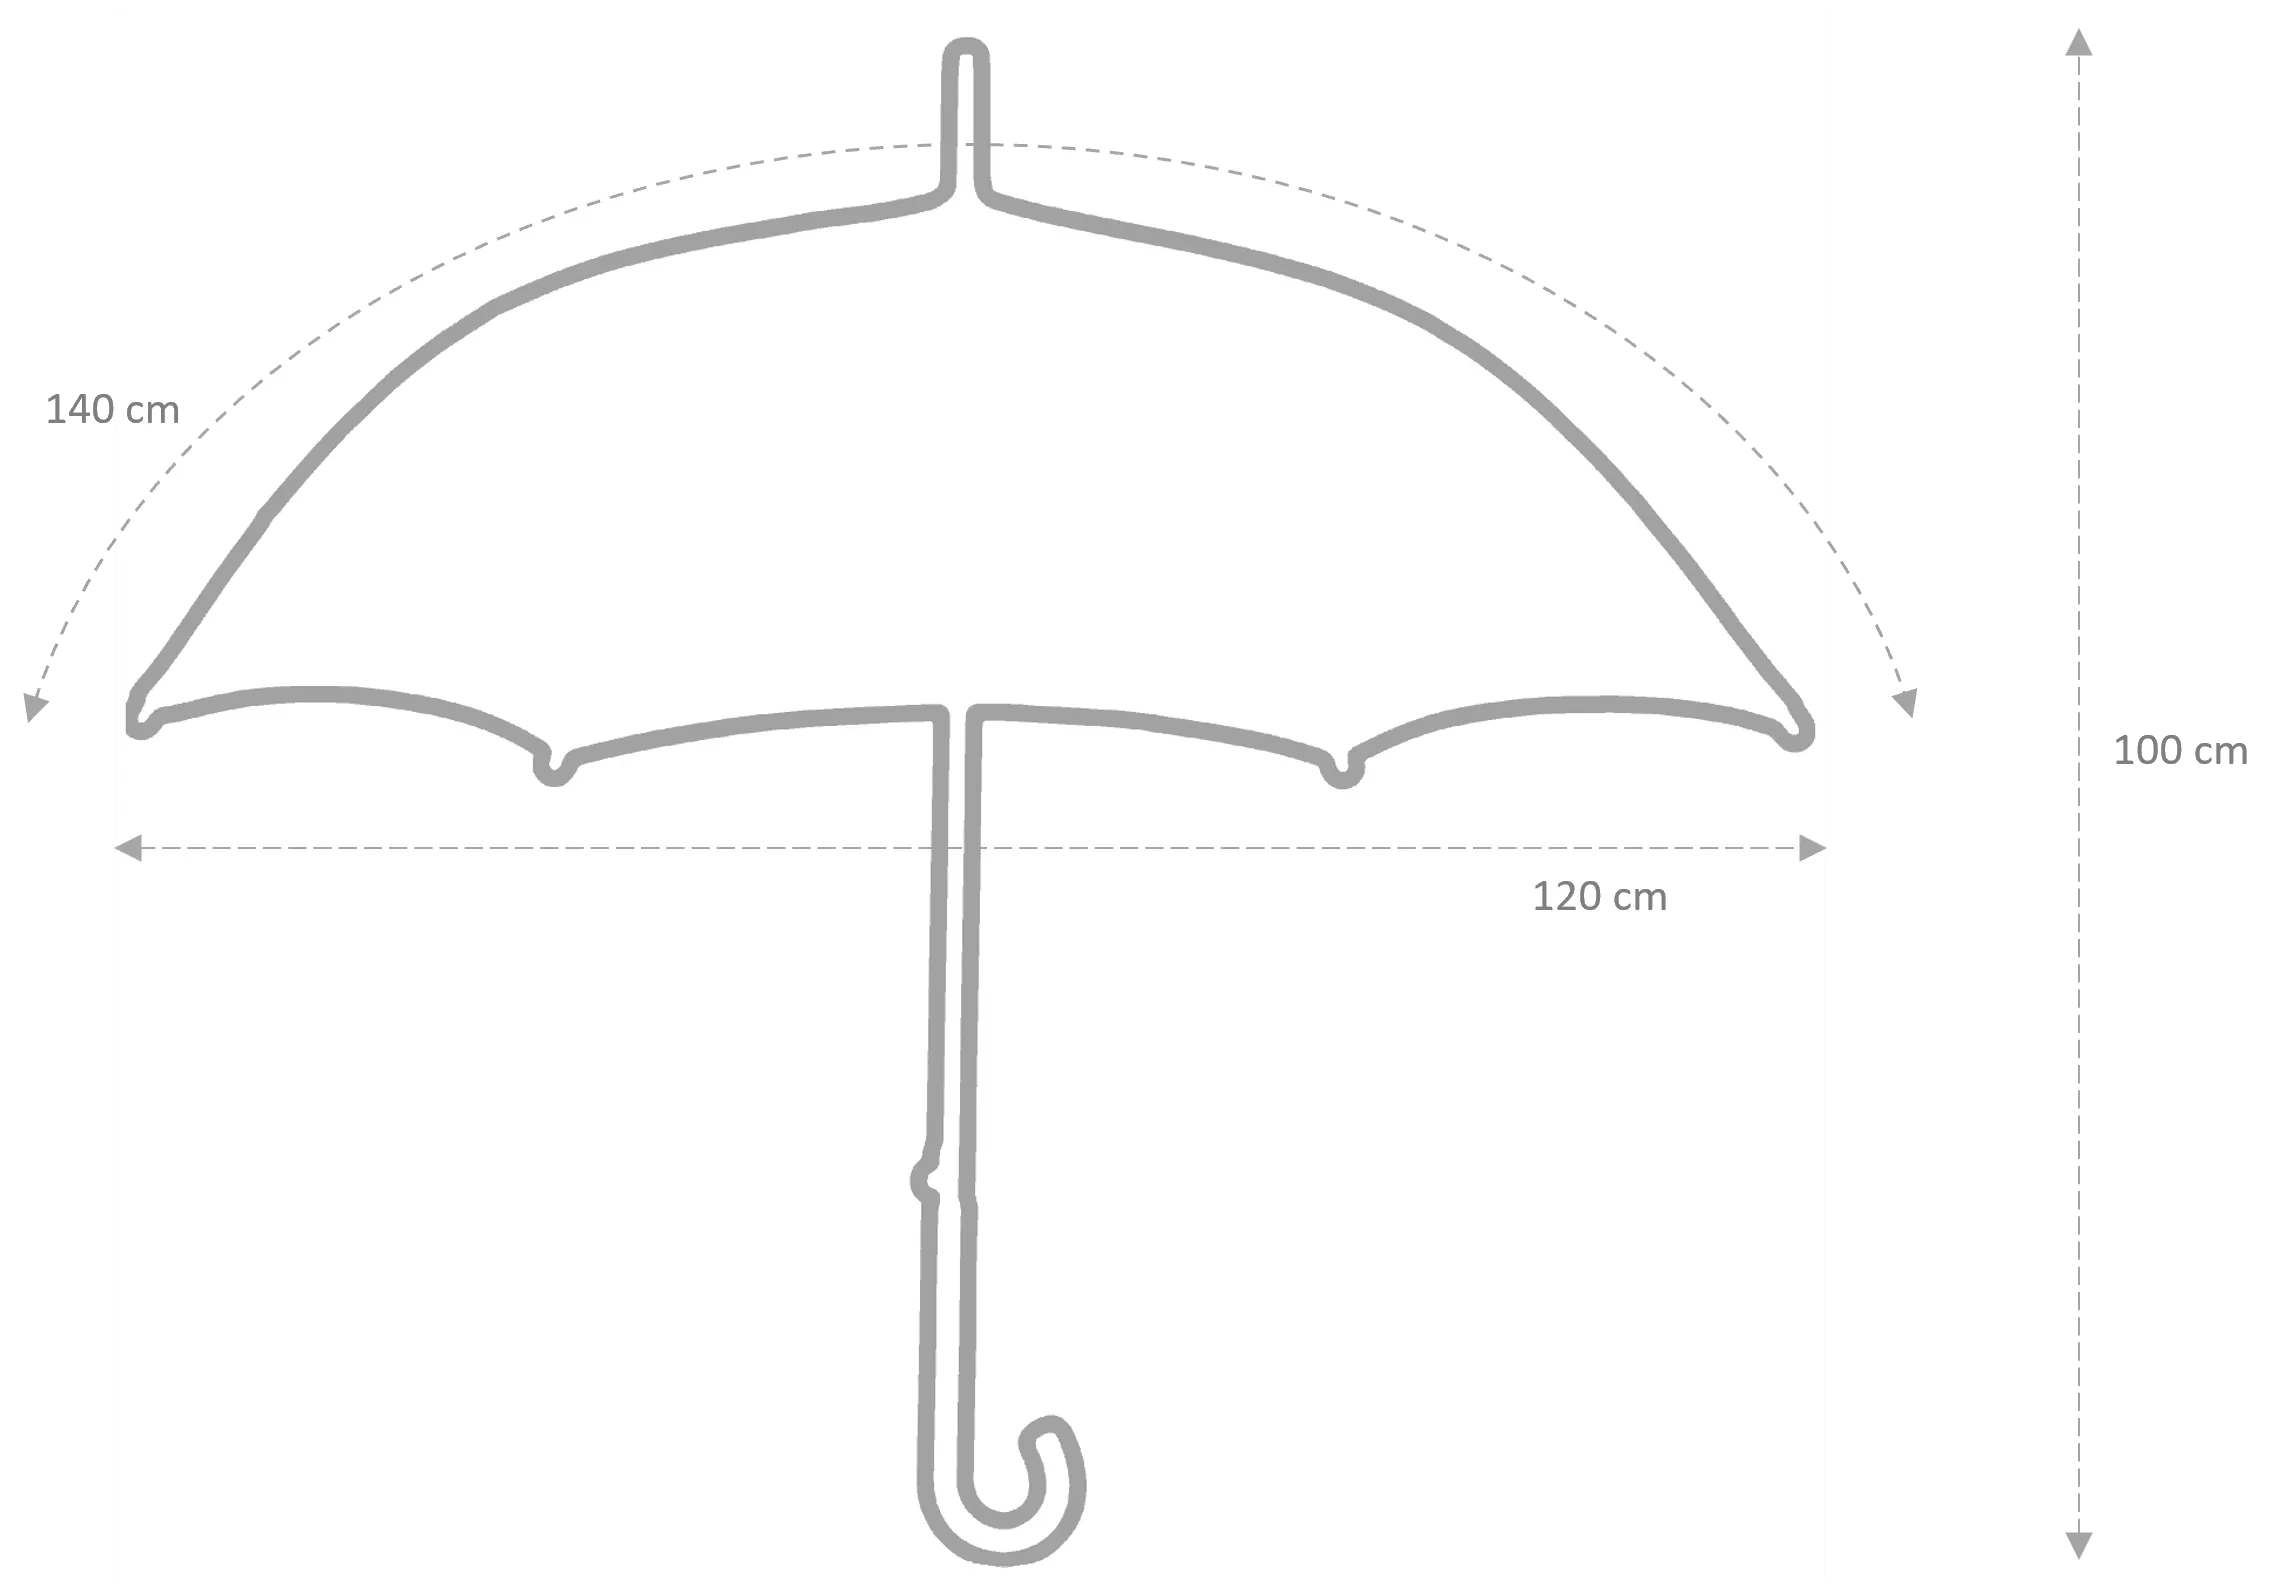 hidewise-london-umbrella-wooden-J-handle-strong-premium-quality-brolly-yellow-gust-proof-gustproof-automatic-straight-golf-size-professional-travel-elegant-sturdy-wind-proof-windproof-canopy-size